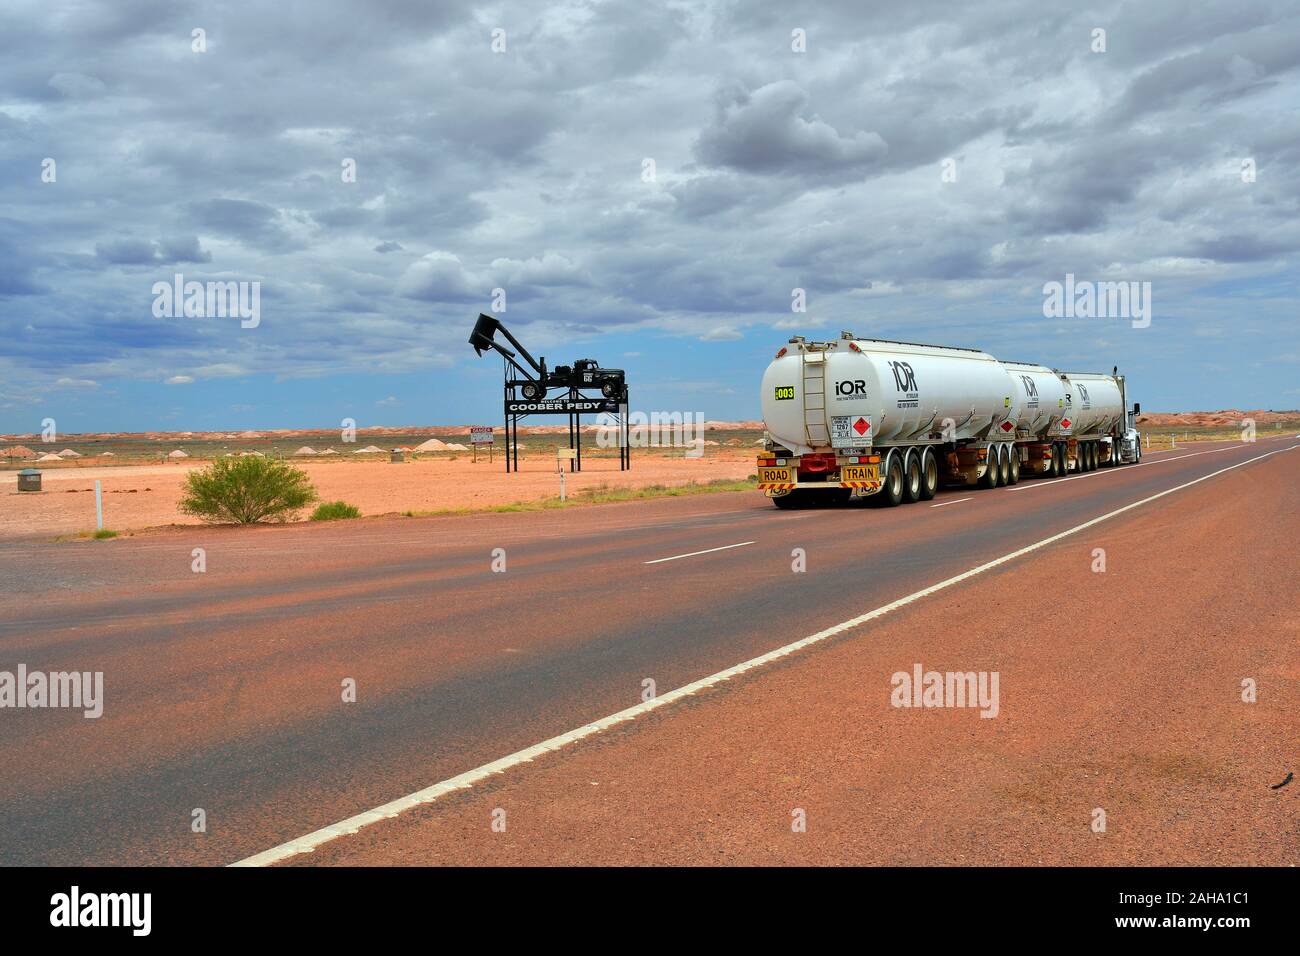 Coober Pedy, SA, Australia - November 13, 2017: Truck with three trailers named Road Train and landmark of Coober Pedy on Stuart Highway Stock Photo